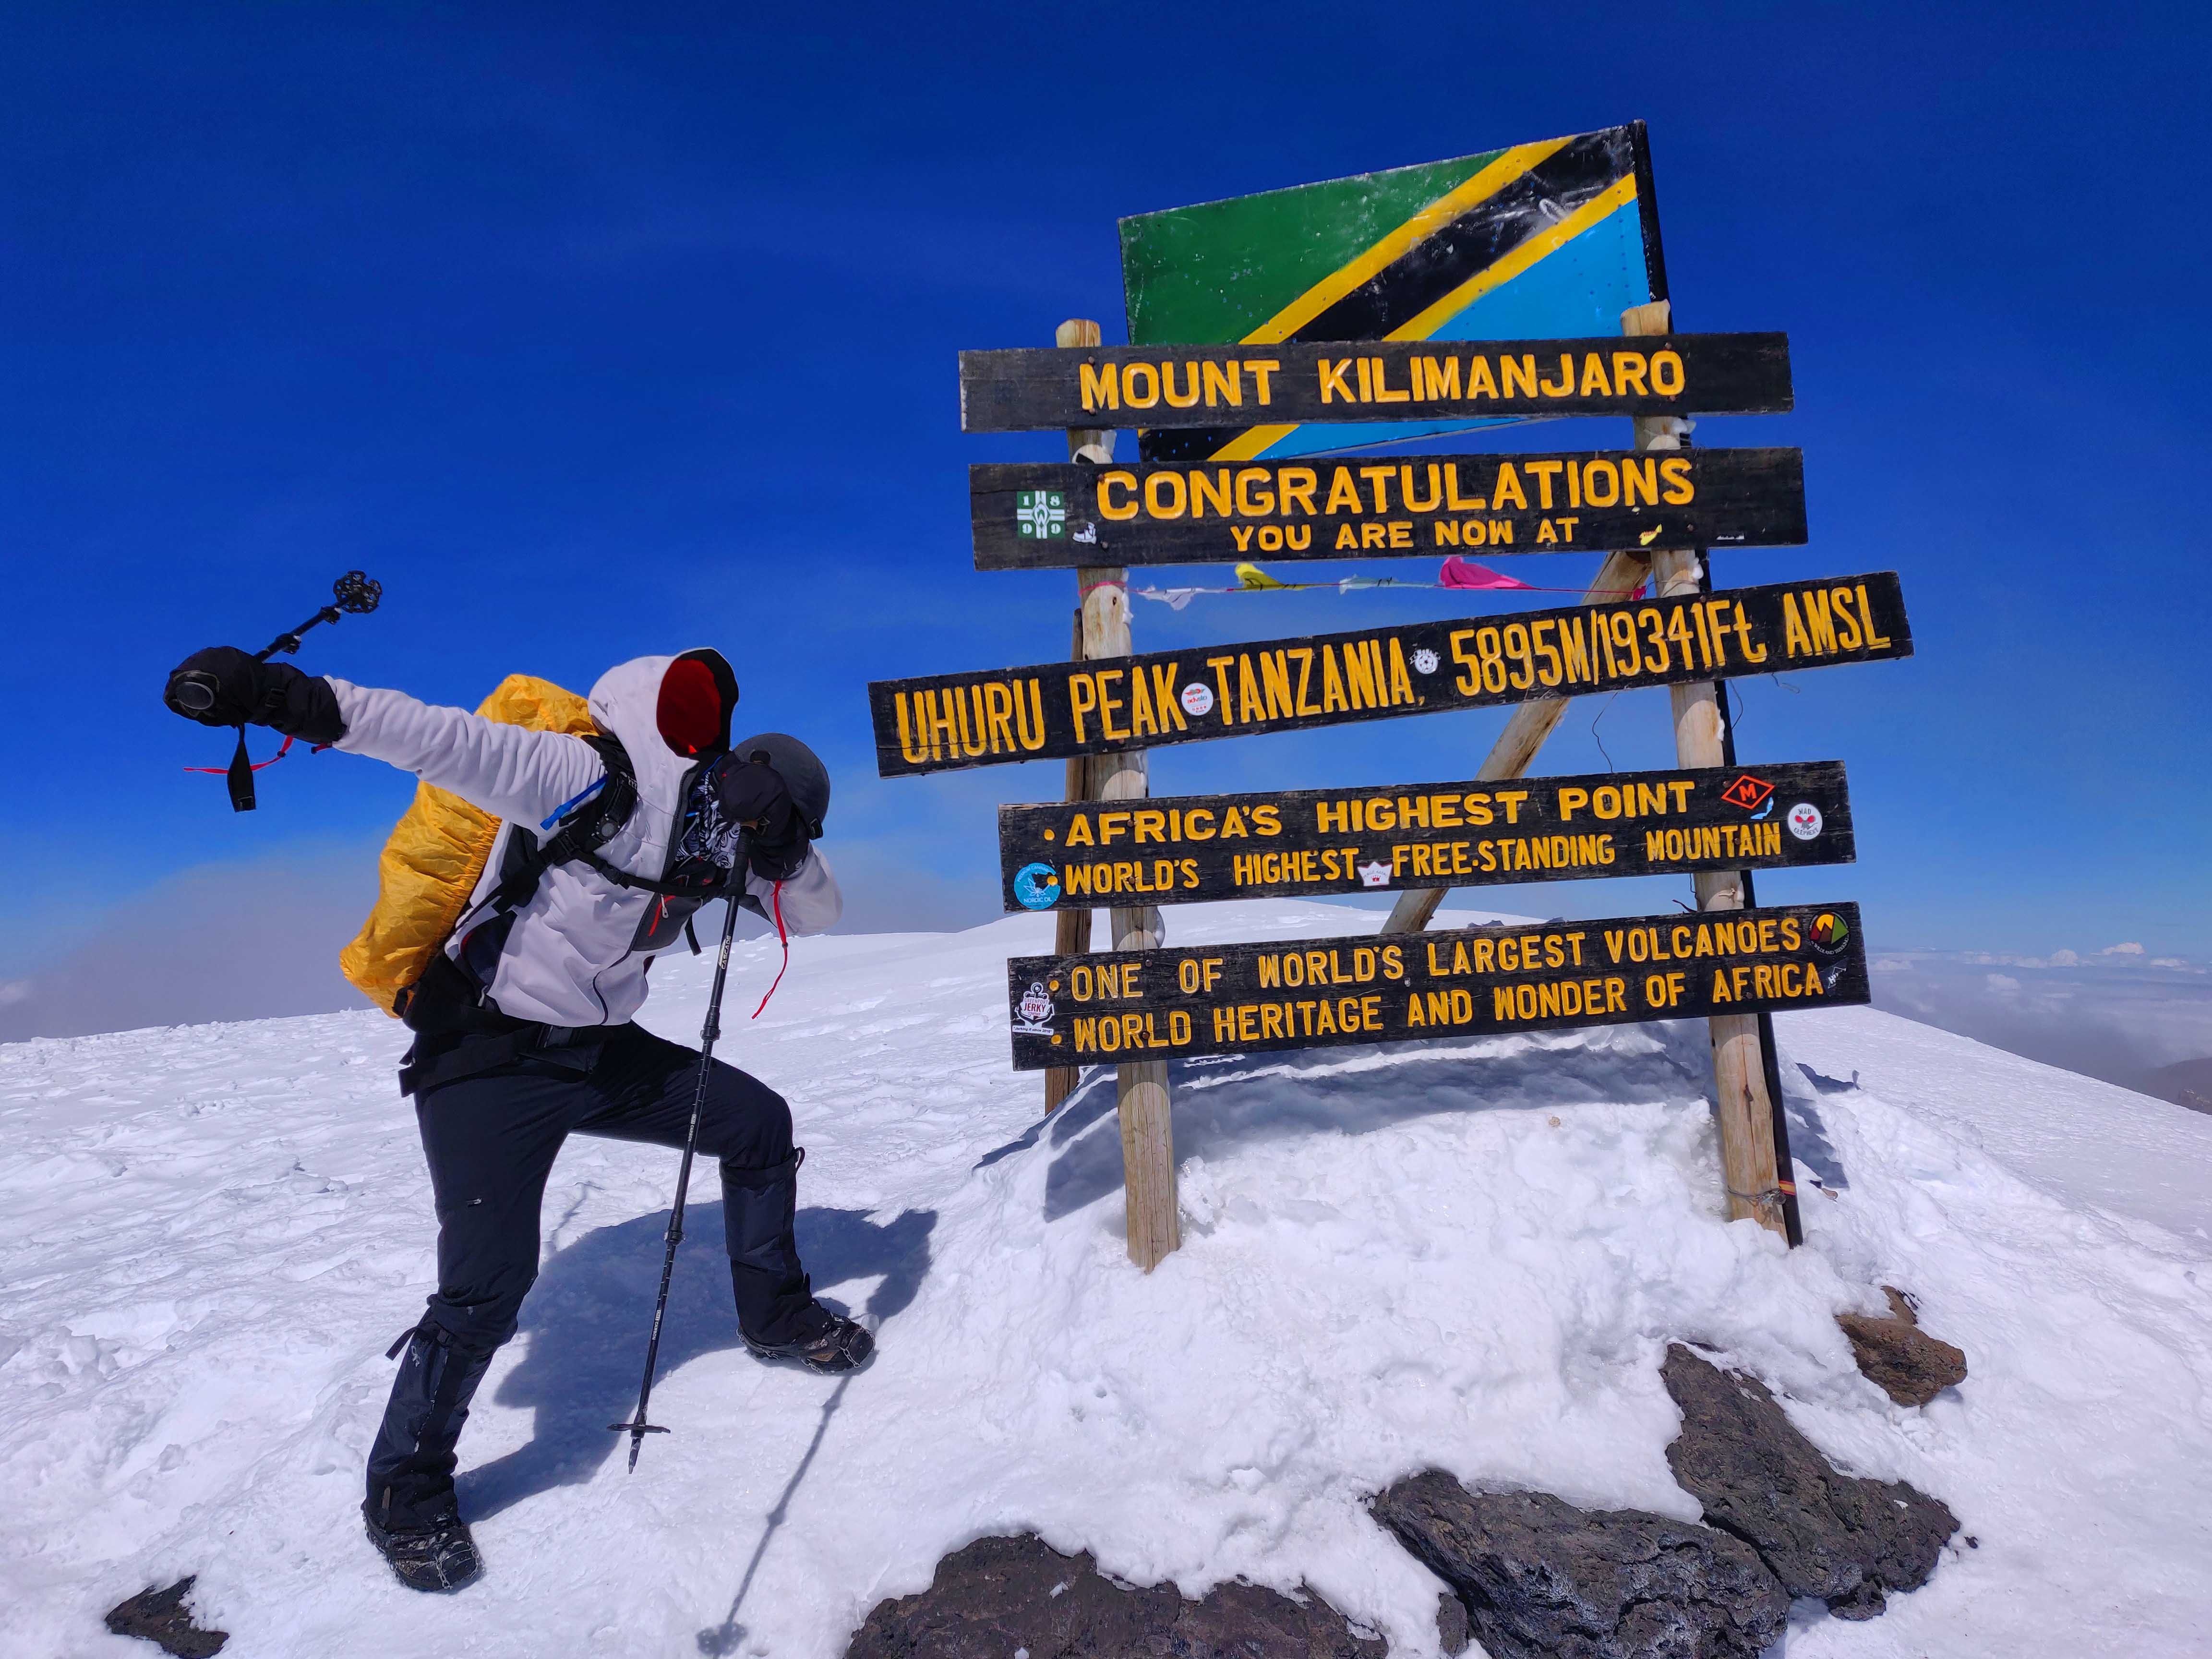 8 Days Northern Circuit Route, Kilimanjaro Package, Remote Route On Kilimanjaro